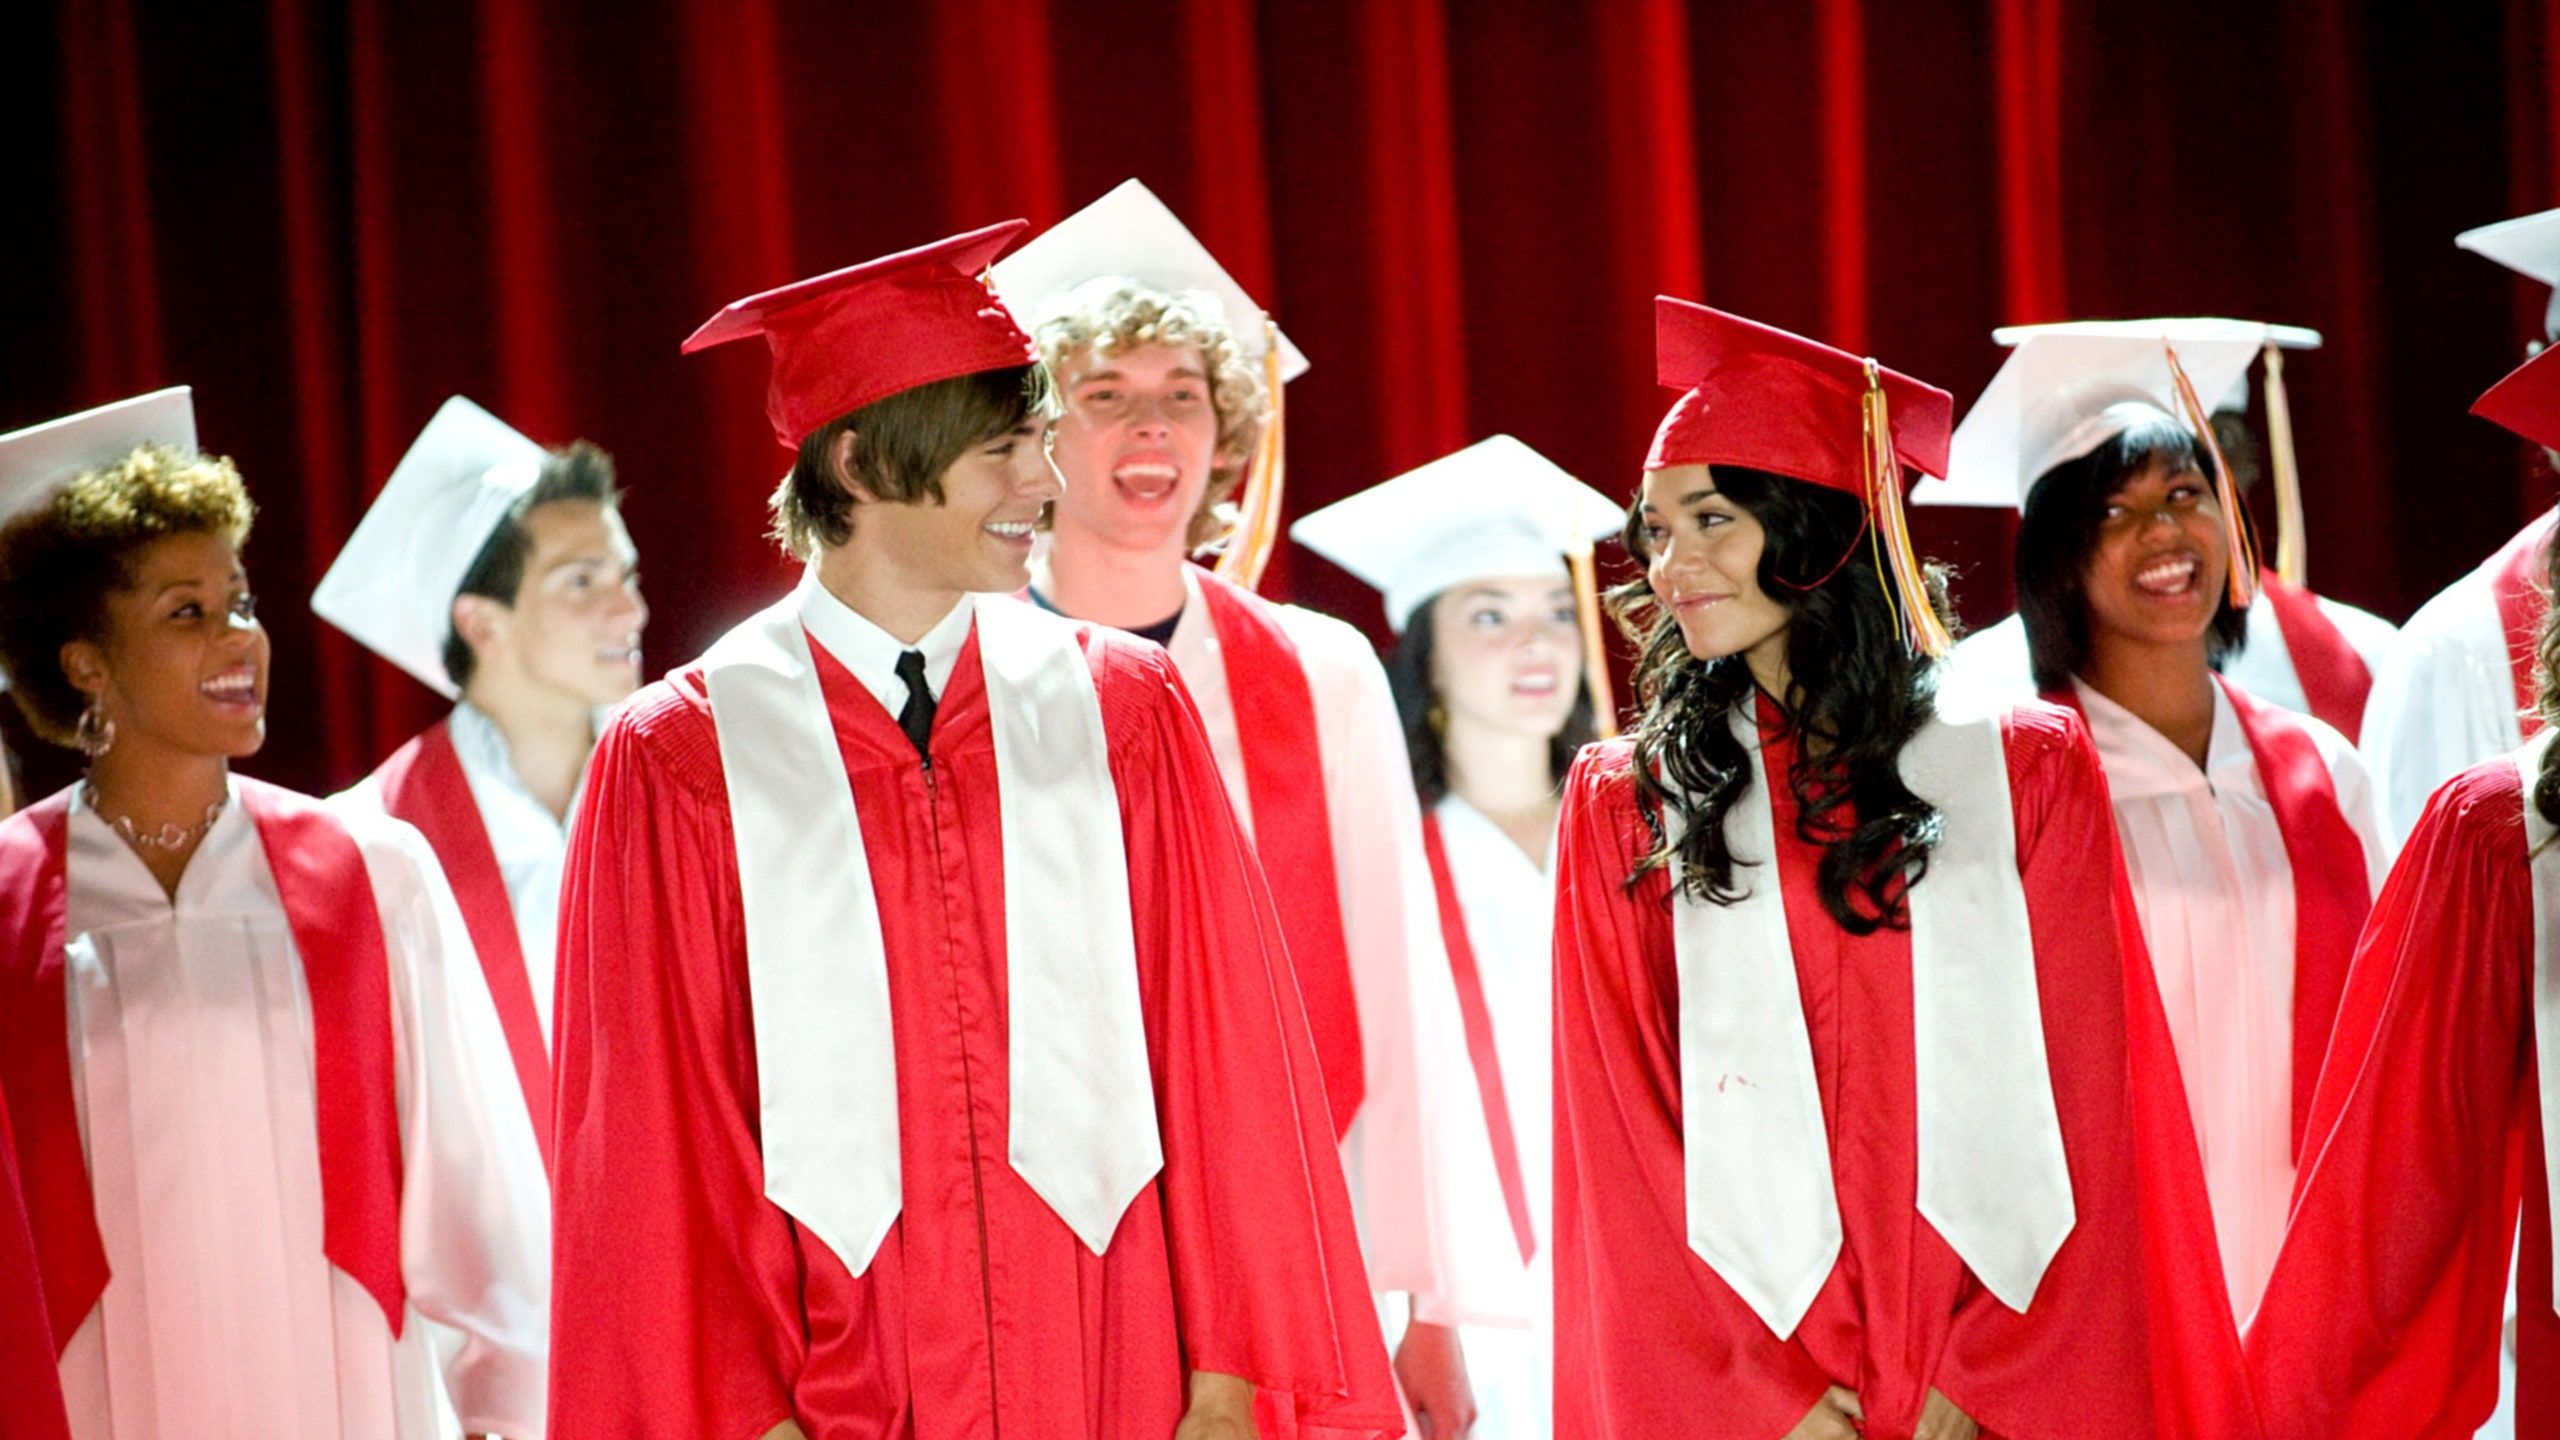 High School Musical Reunion Movie by Fan Goes Viral